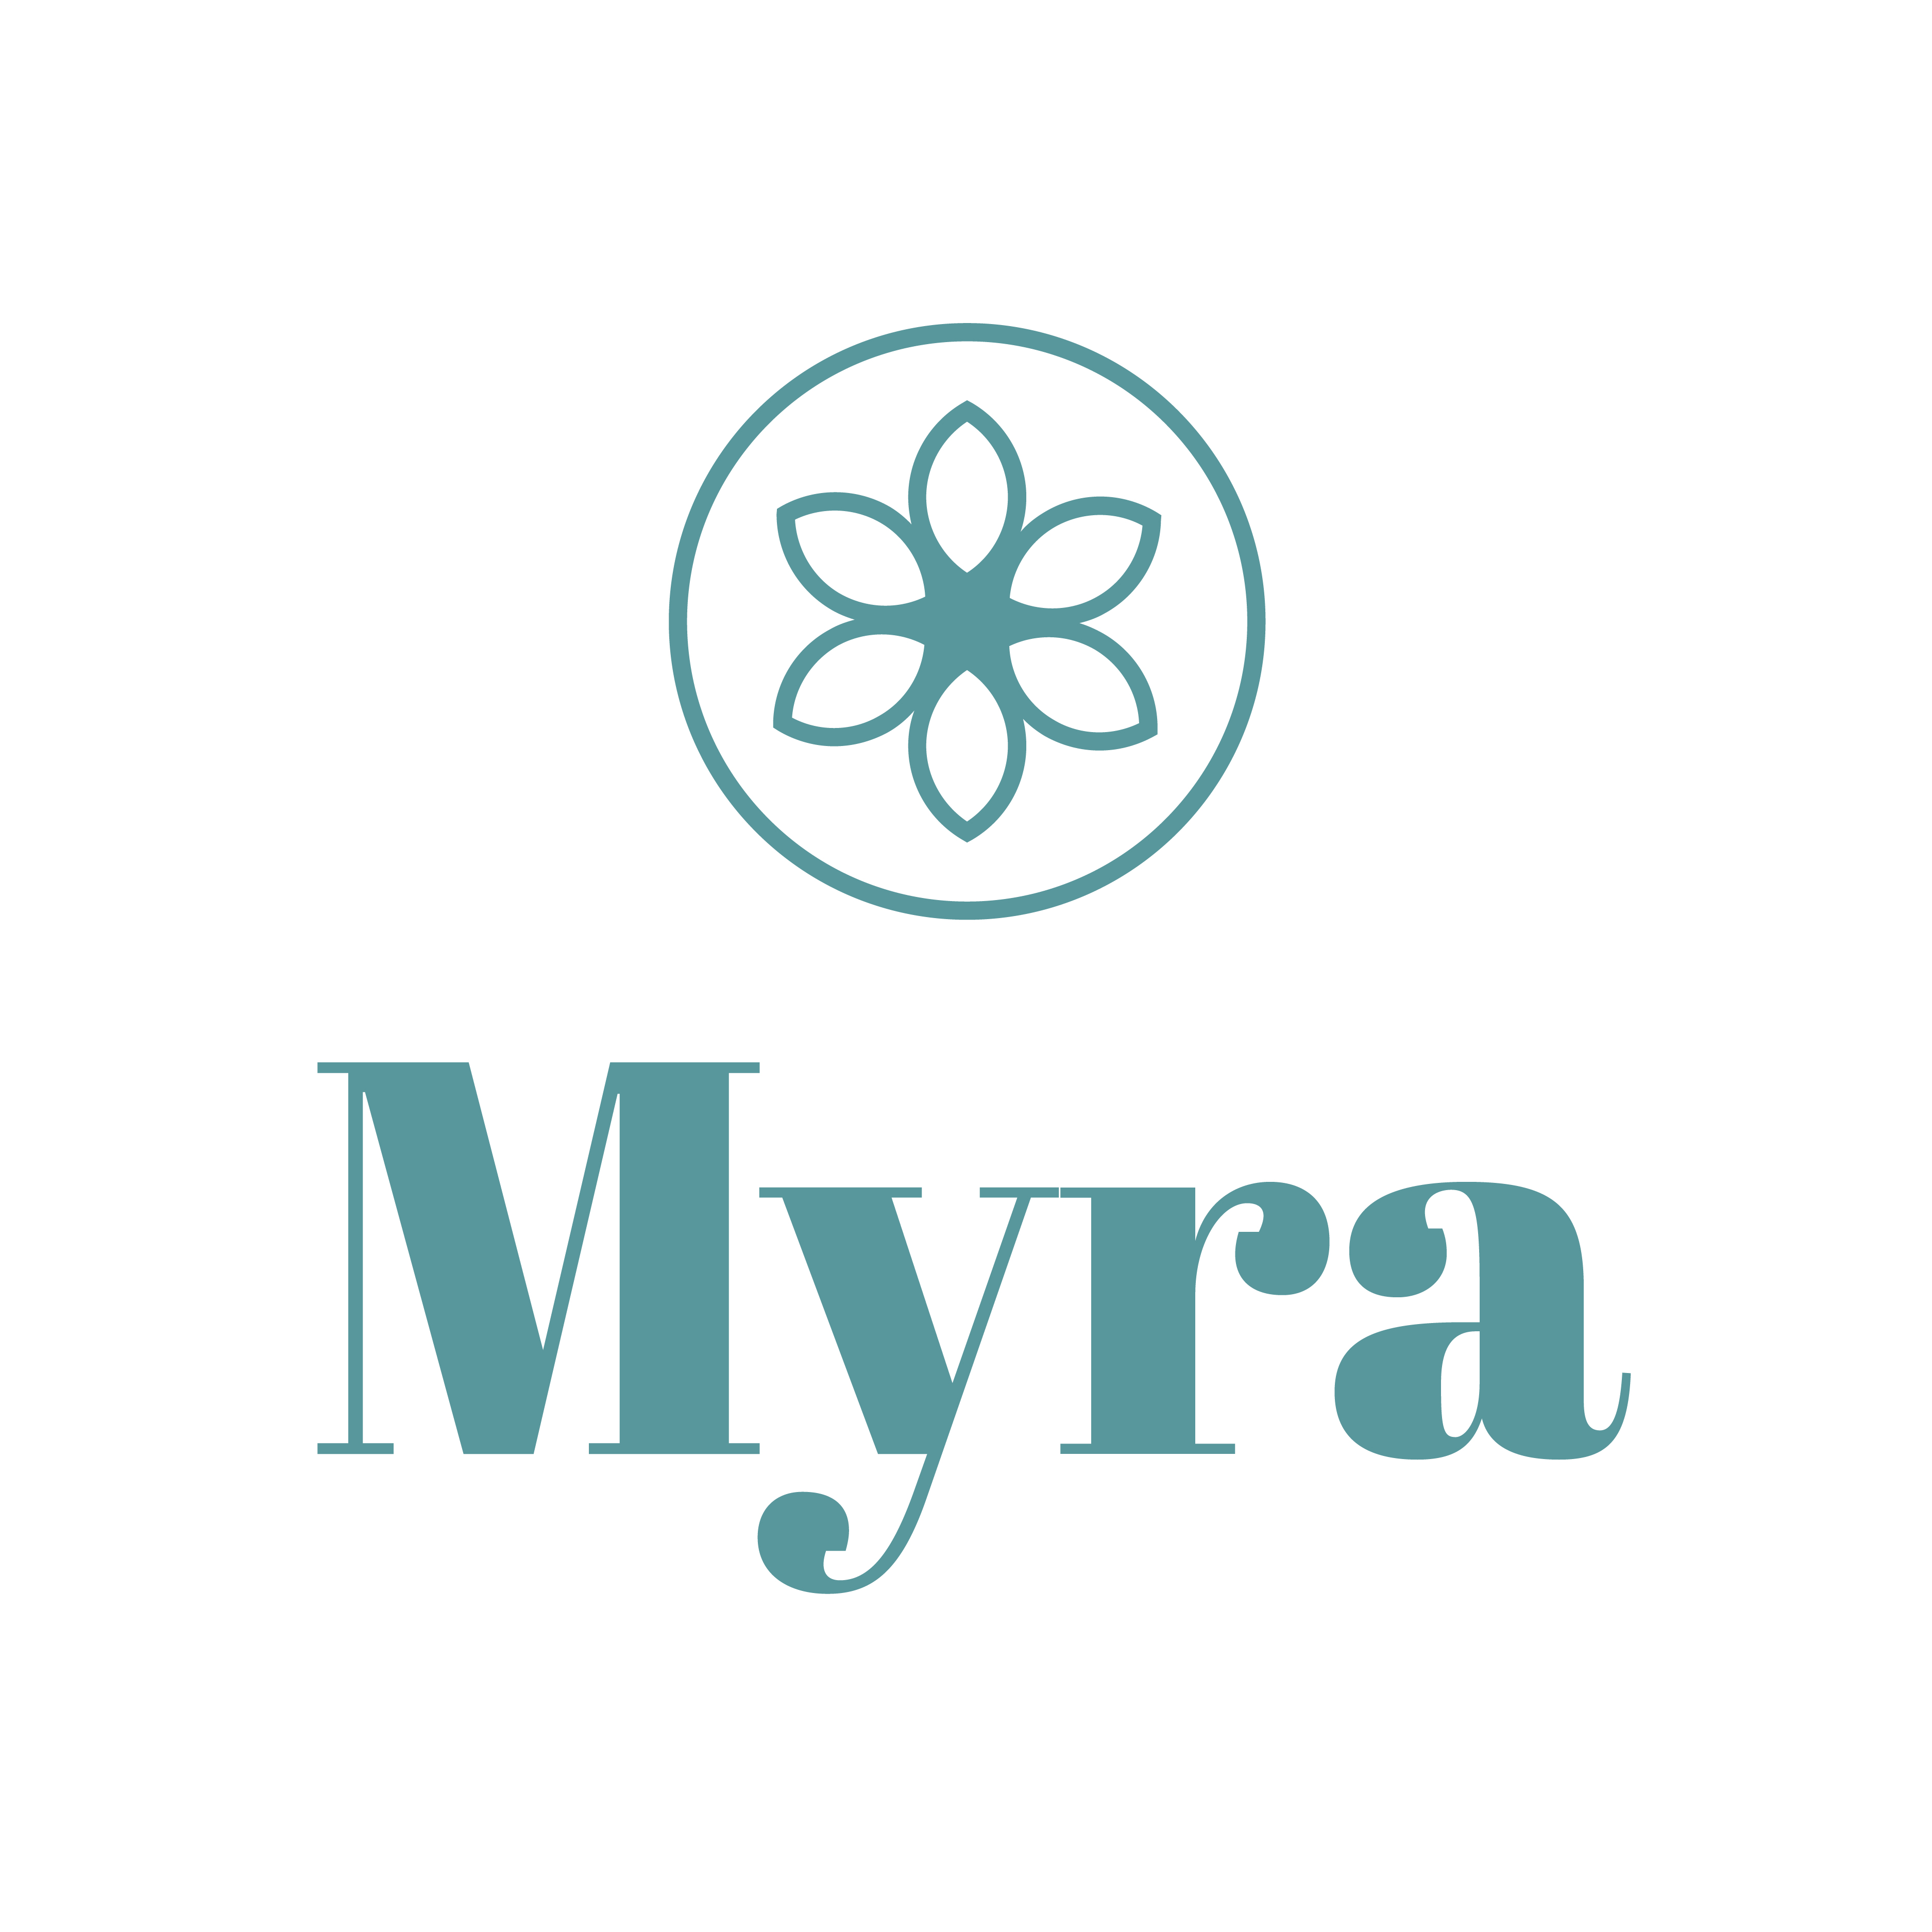 Myra logo design by logo designer L.L. Peach for your inspiration and for the worlds largest logo competition